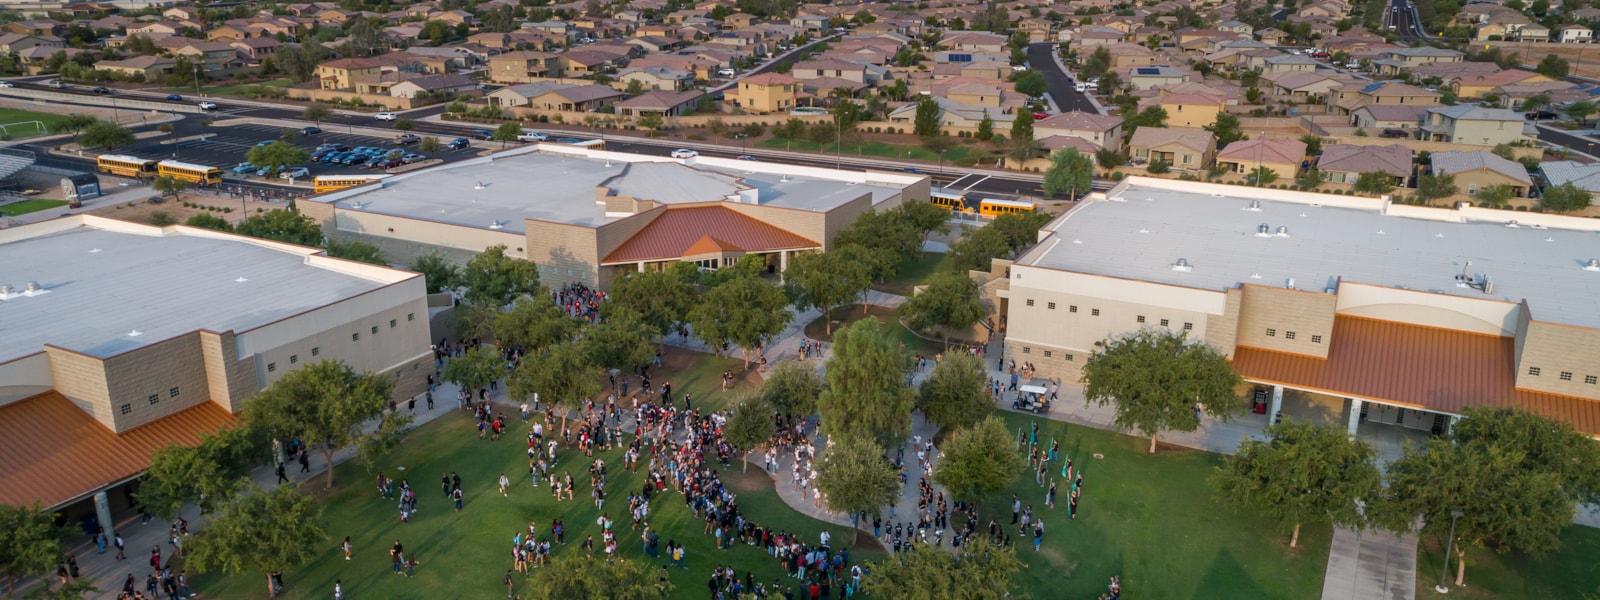 Overhead view of the Willow Canyon Campus